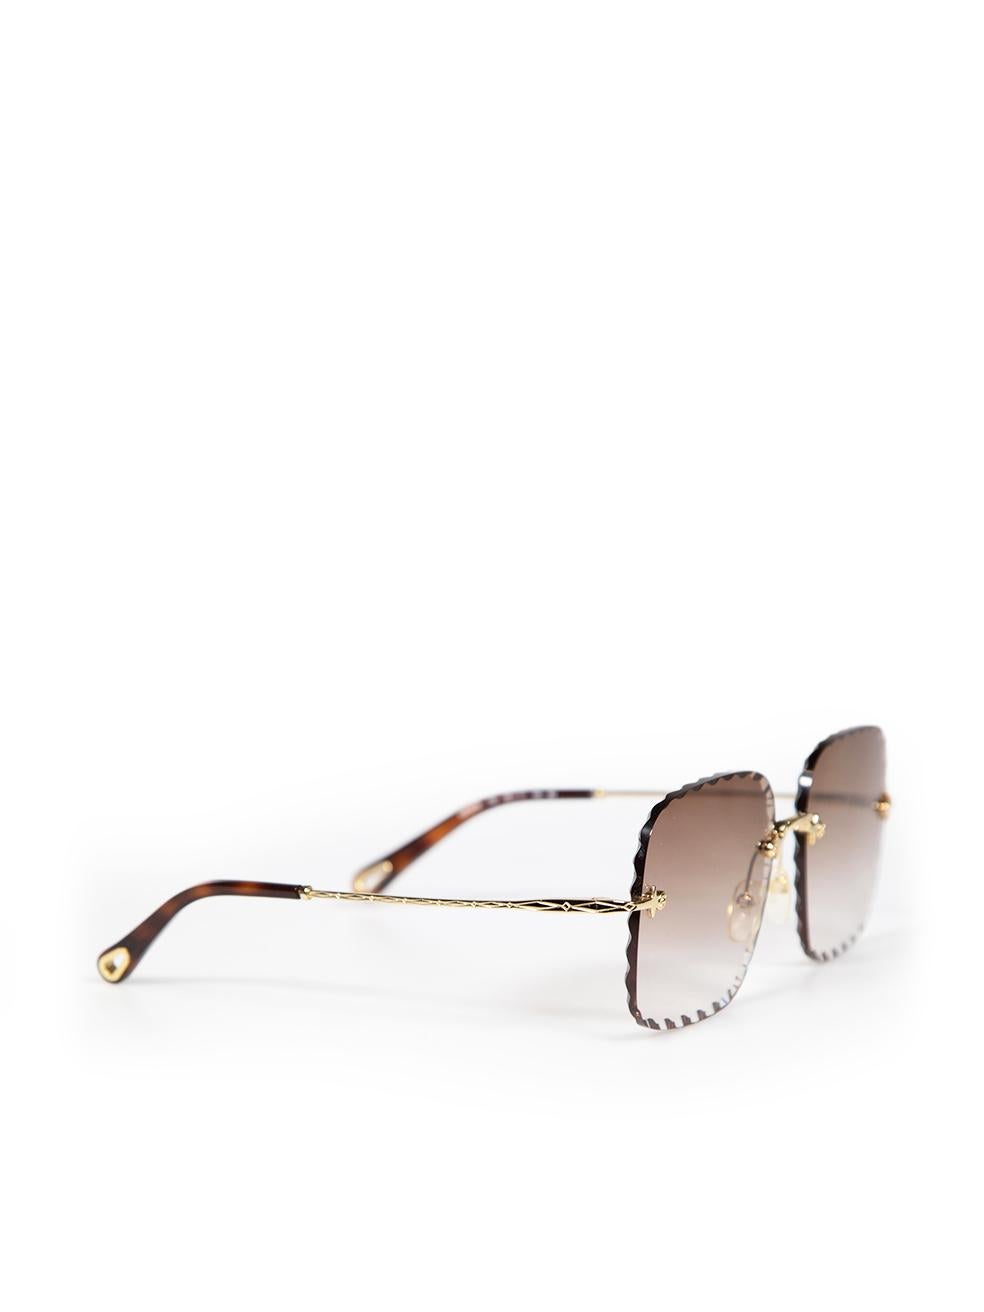 CONDITION is Very good. Hardly any visible wear to sunglasses is evident on this used Chloé designer resale item. This item comes with the original case and box.
 
 
 
 Details
 
 
 Brown
 
 Metal
 
 Sunglasses
 
 Rimless
 
 Scalloped edge
 
 Brown